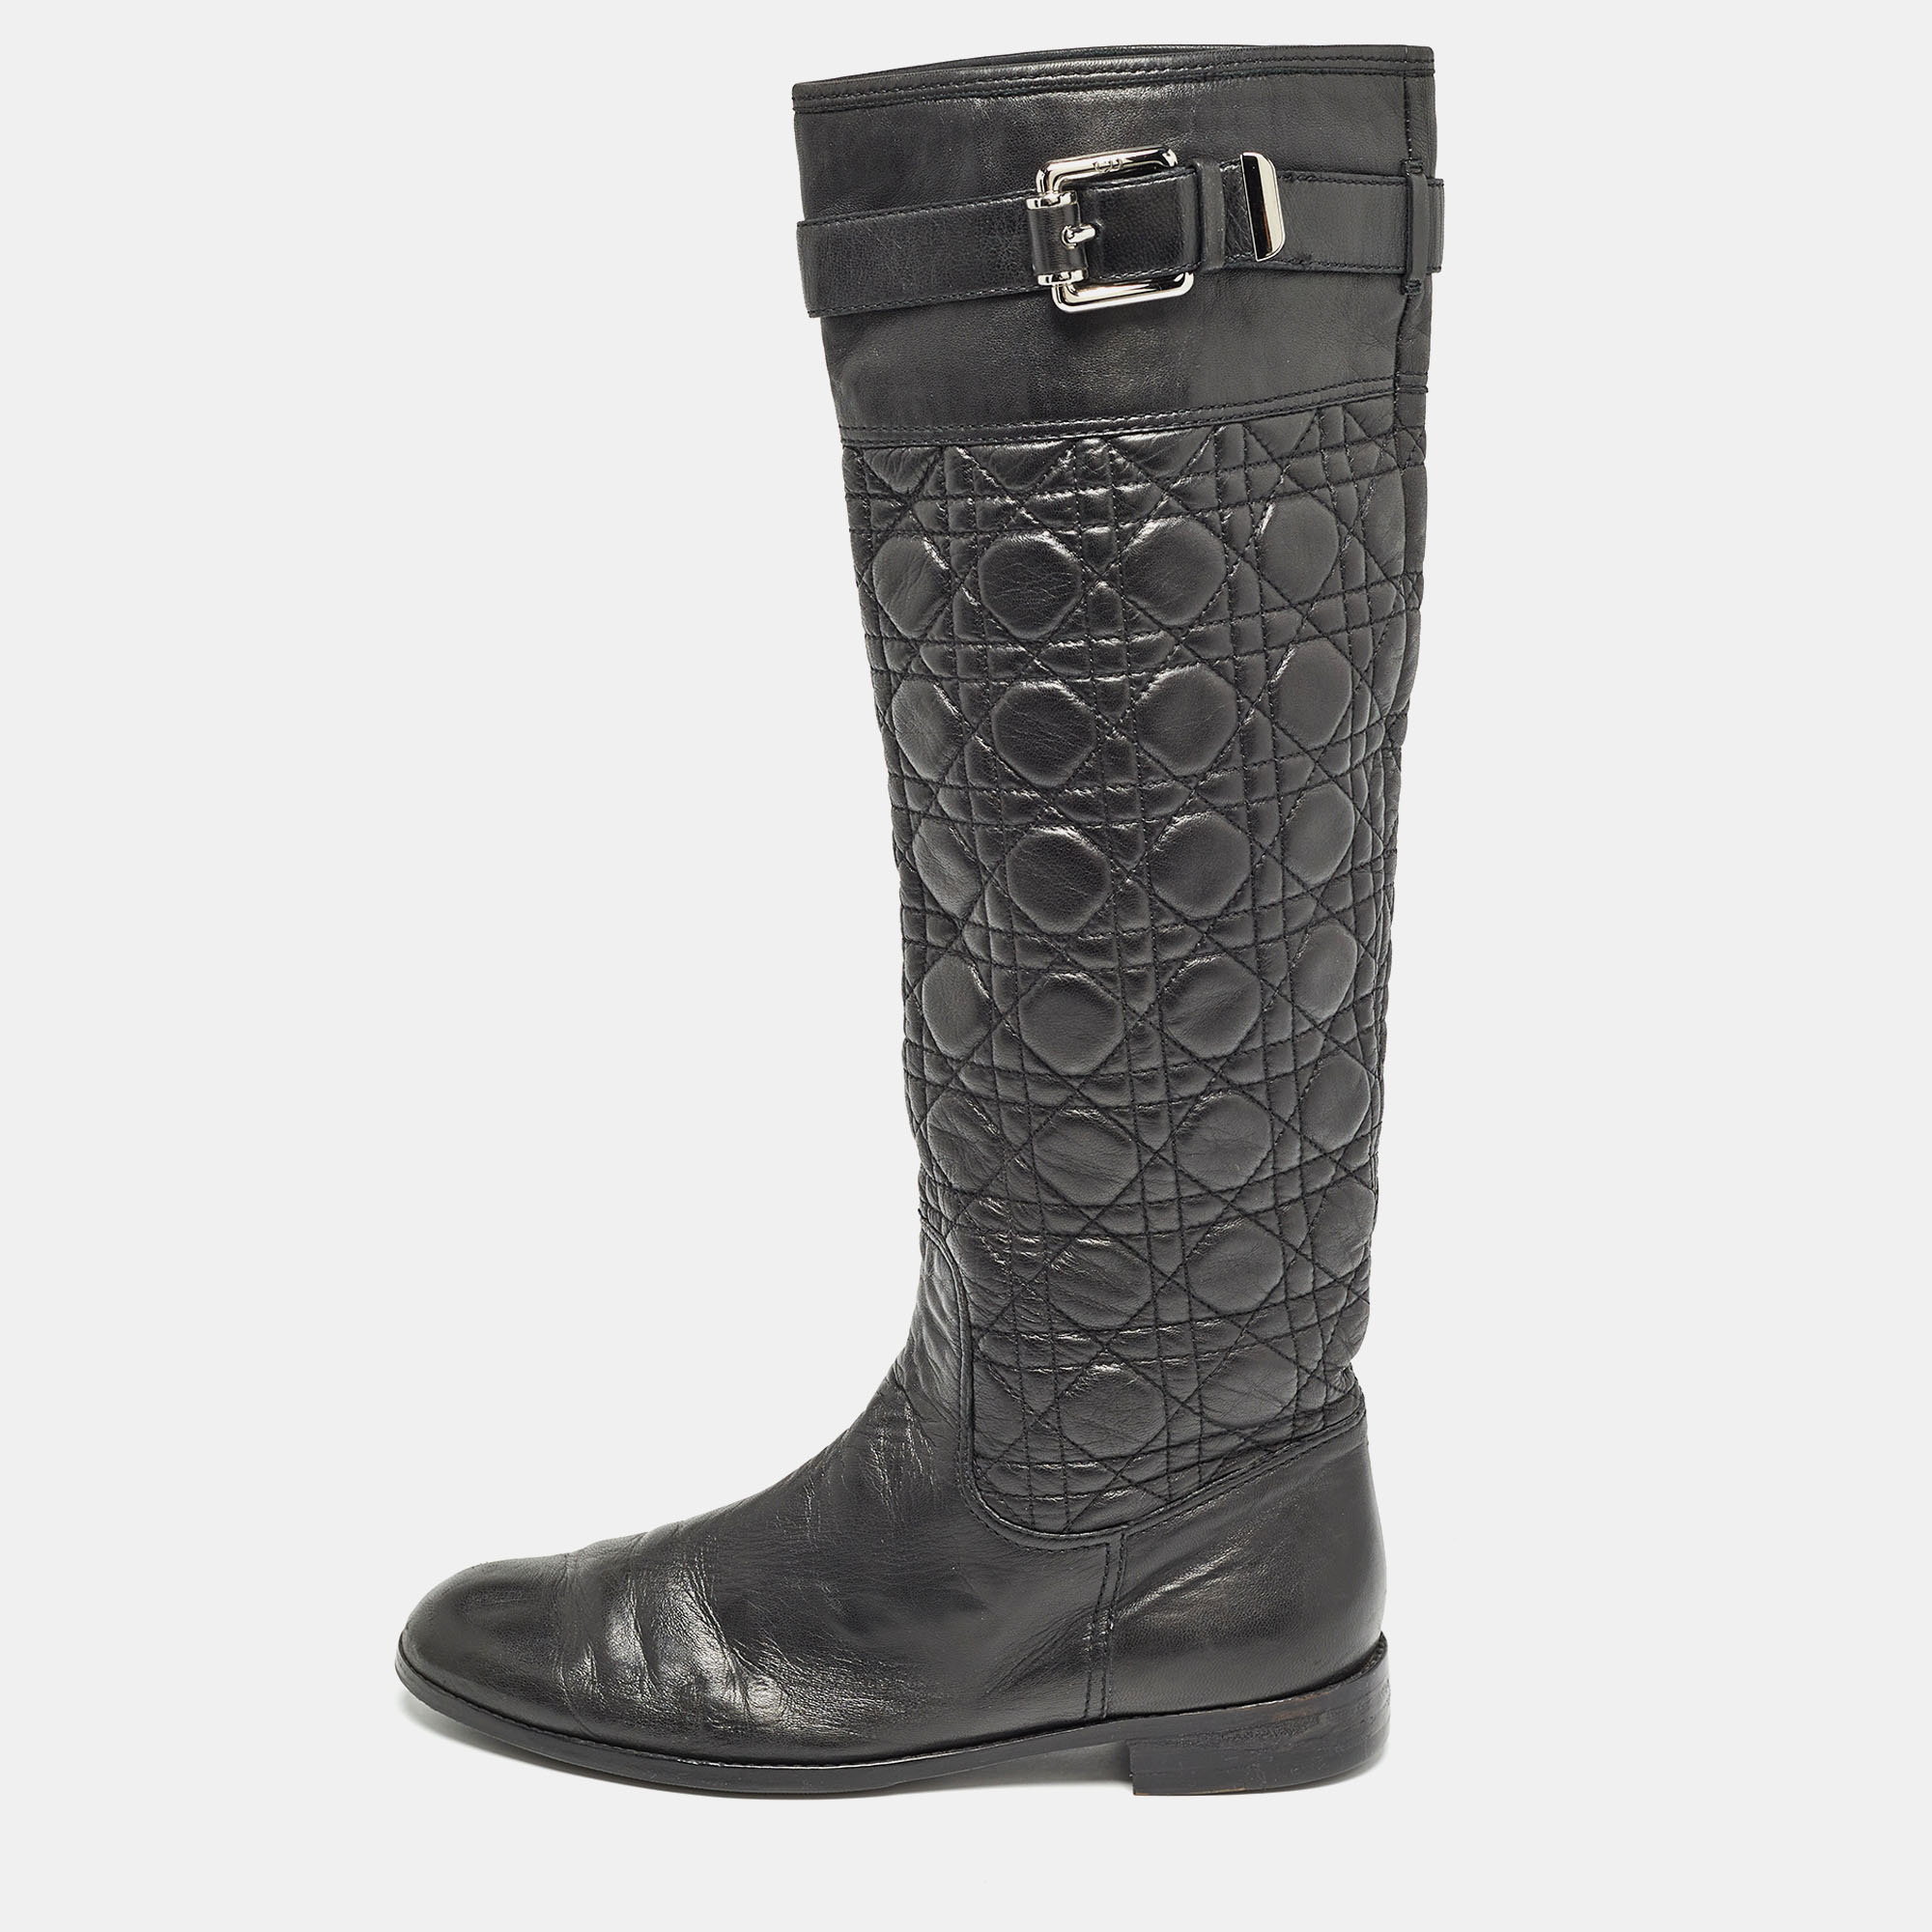 Dior black quilted leather buckle detail knee length boots size 41